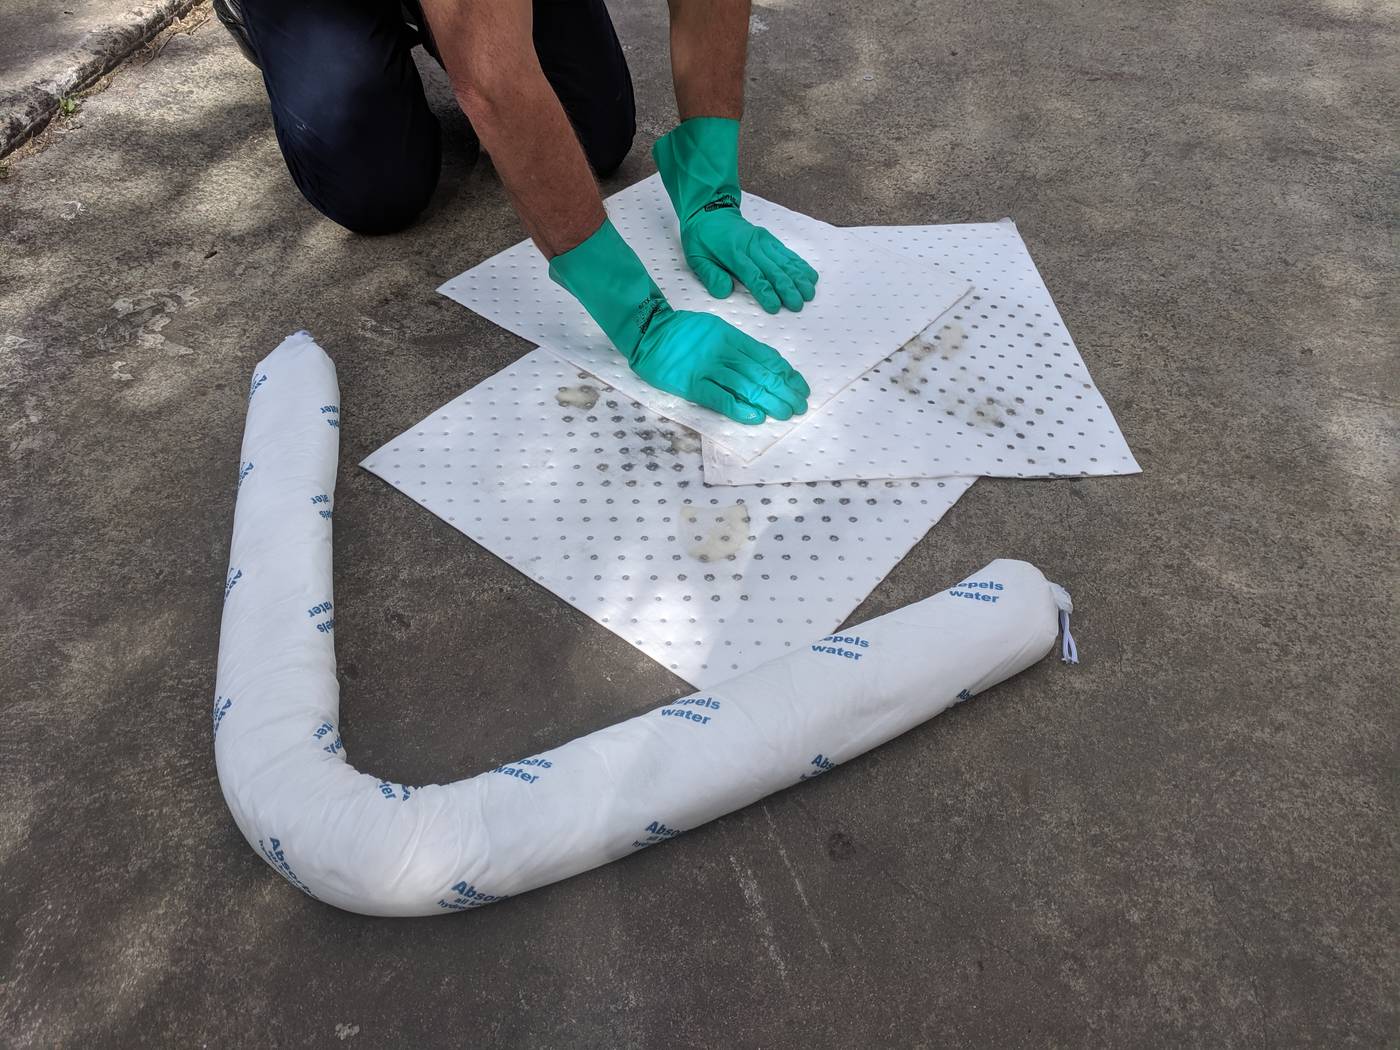 a person wearing gloves is absorbing a spill on the ground using pads and booms for spill clean up